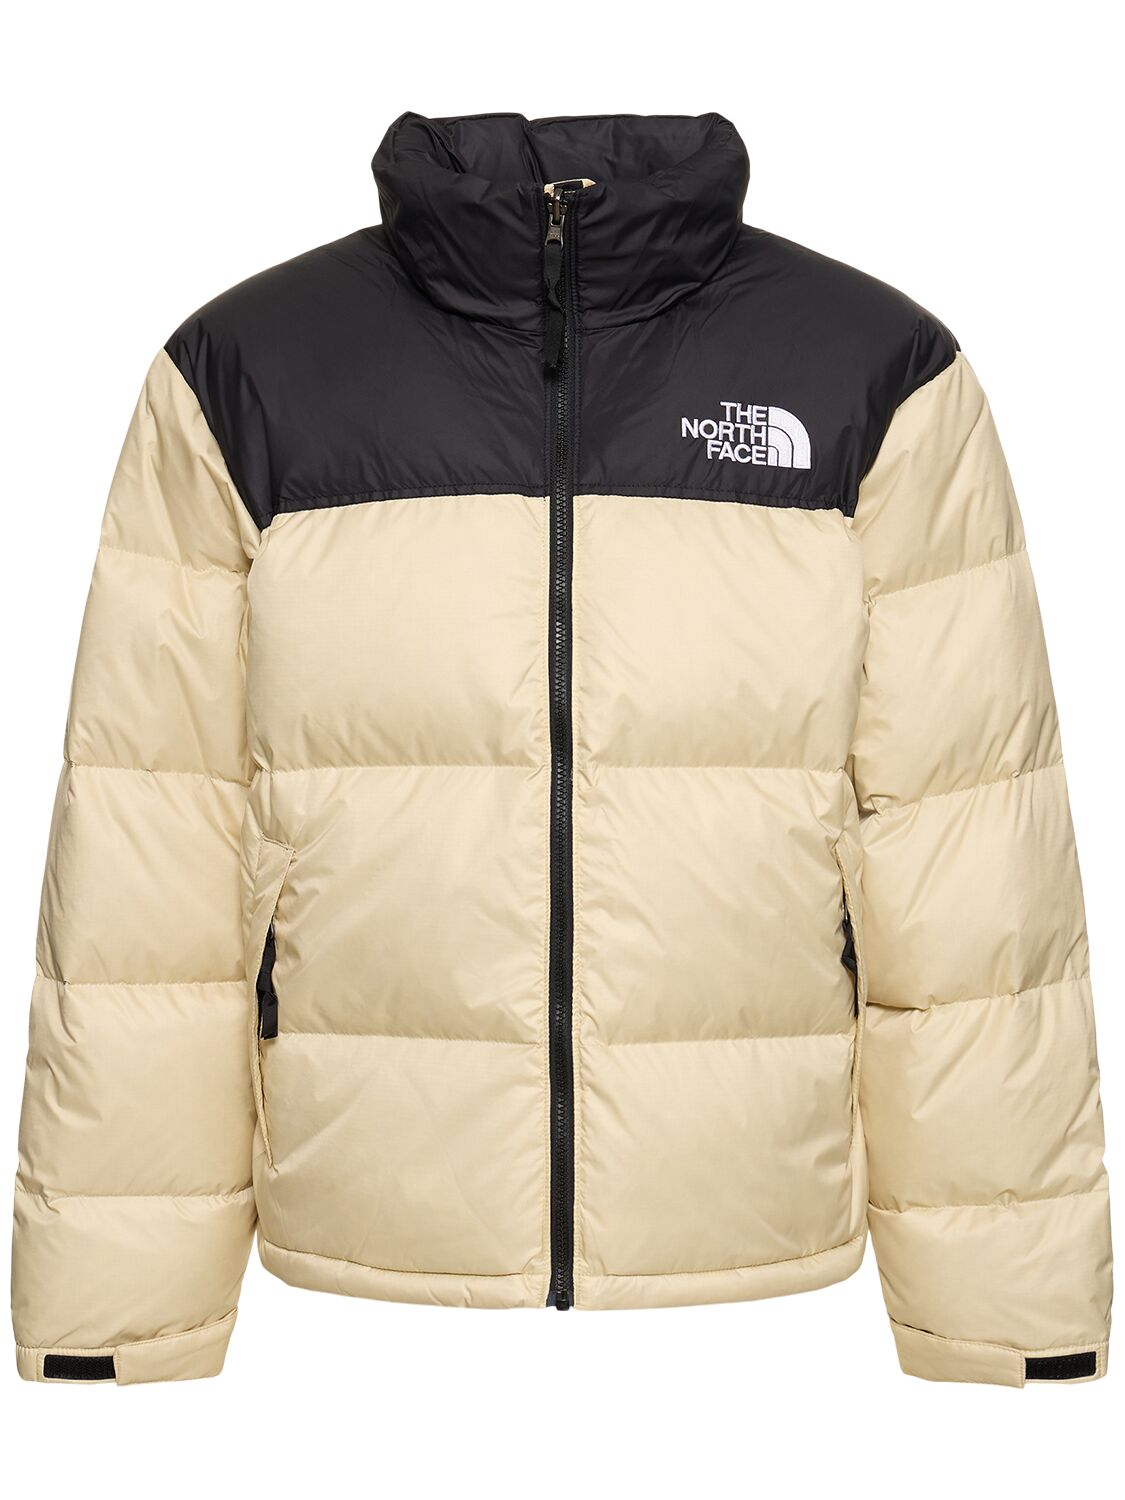 THE NORTH FACE 1996 RETRO DOWN JACKET